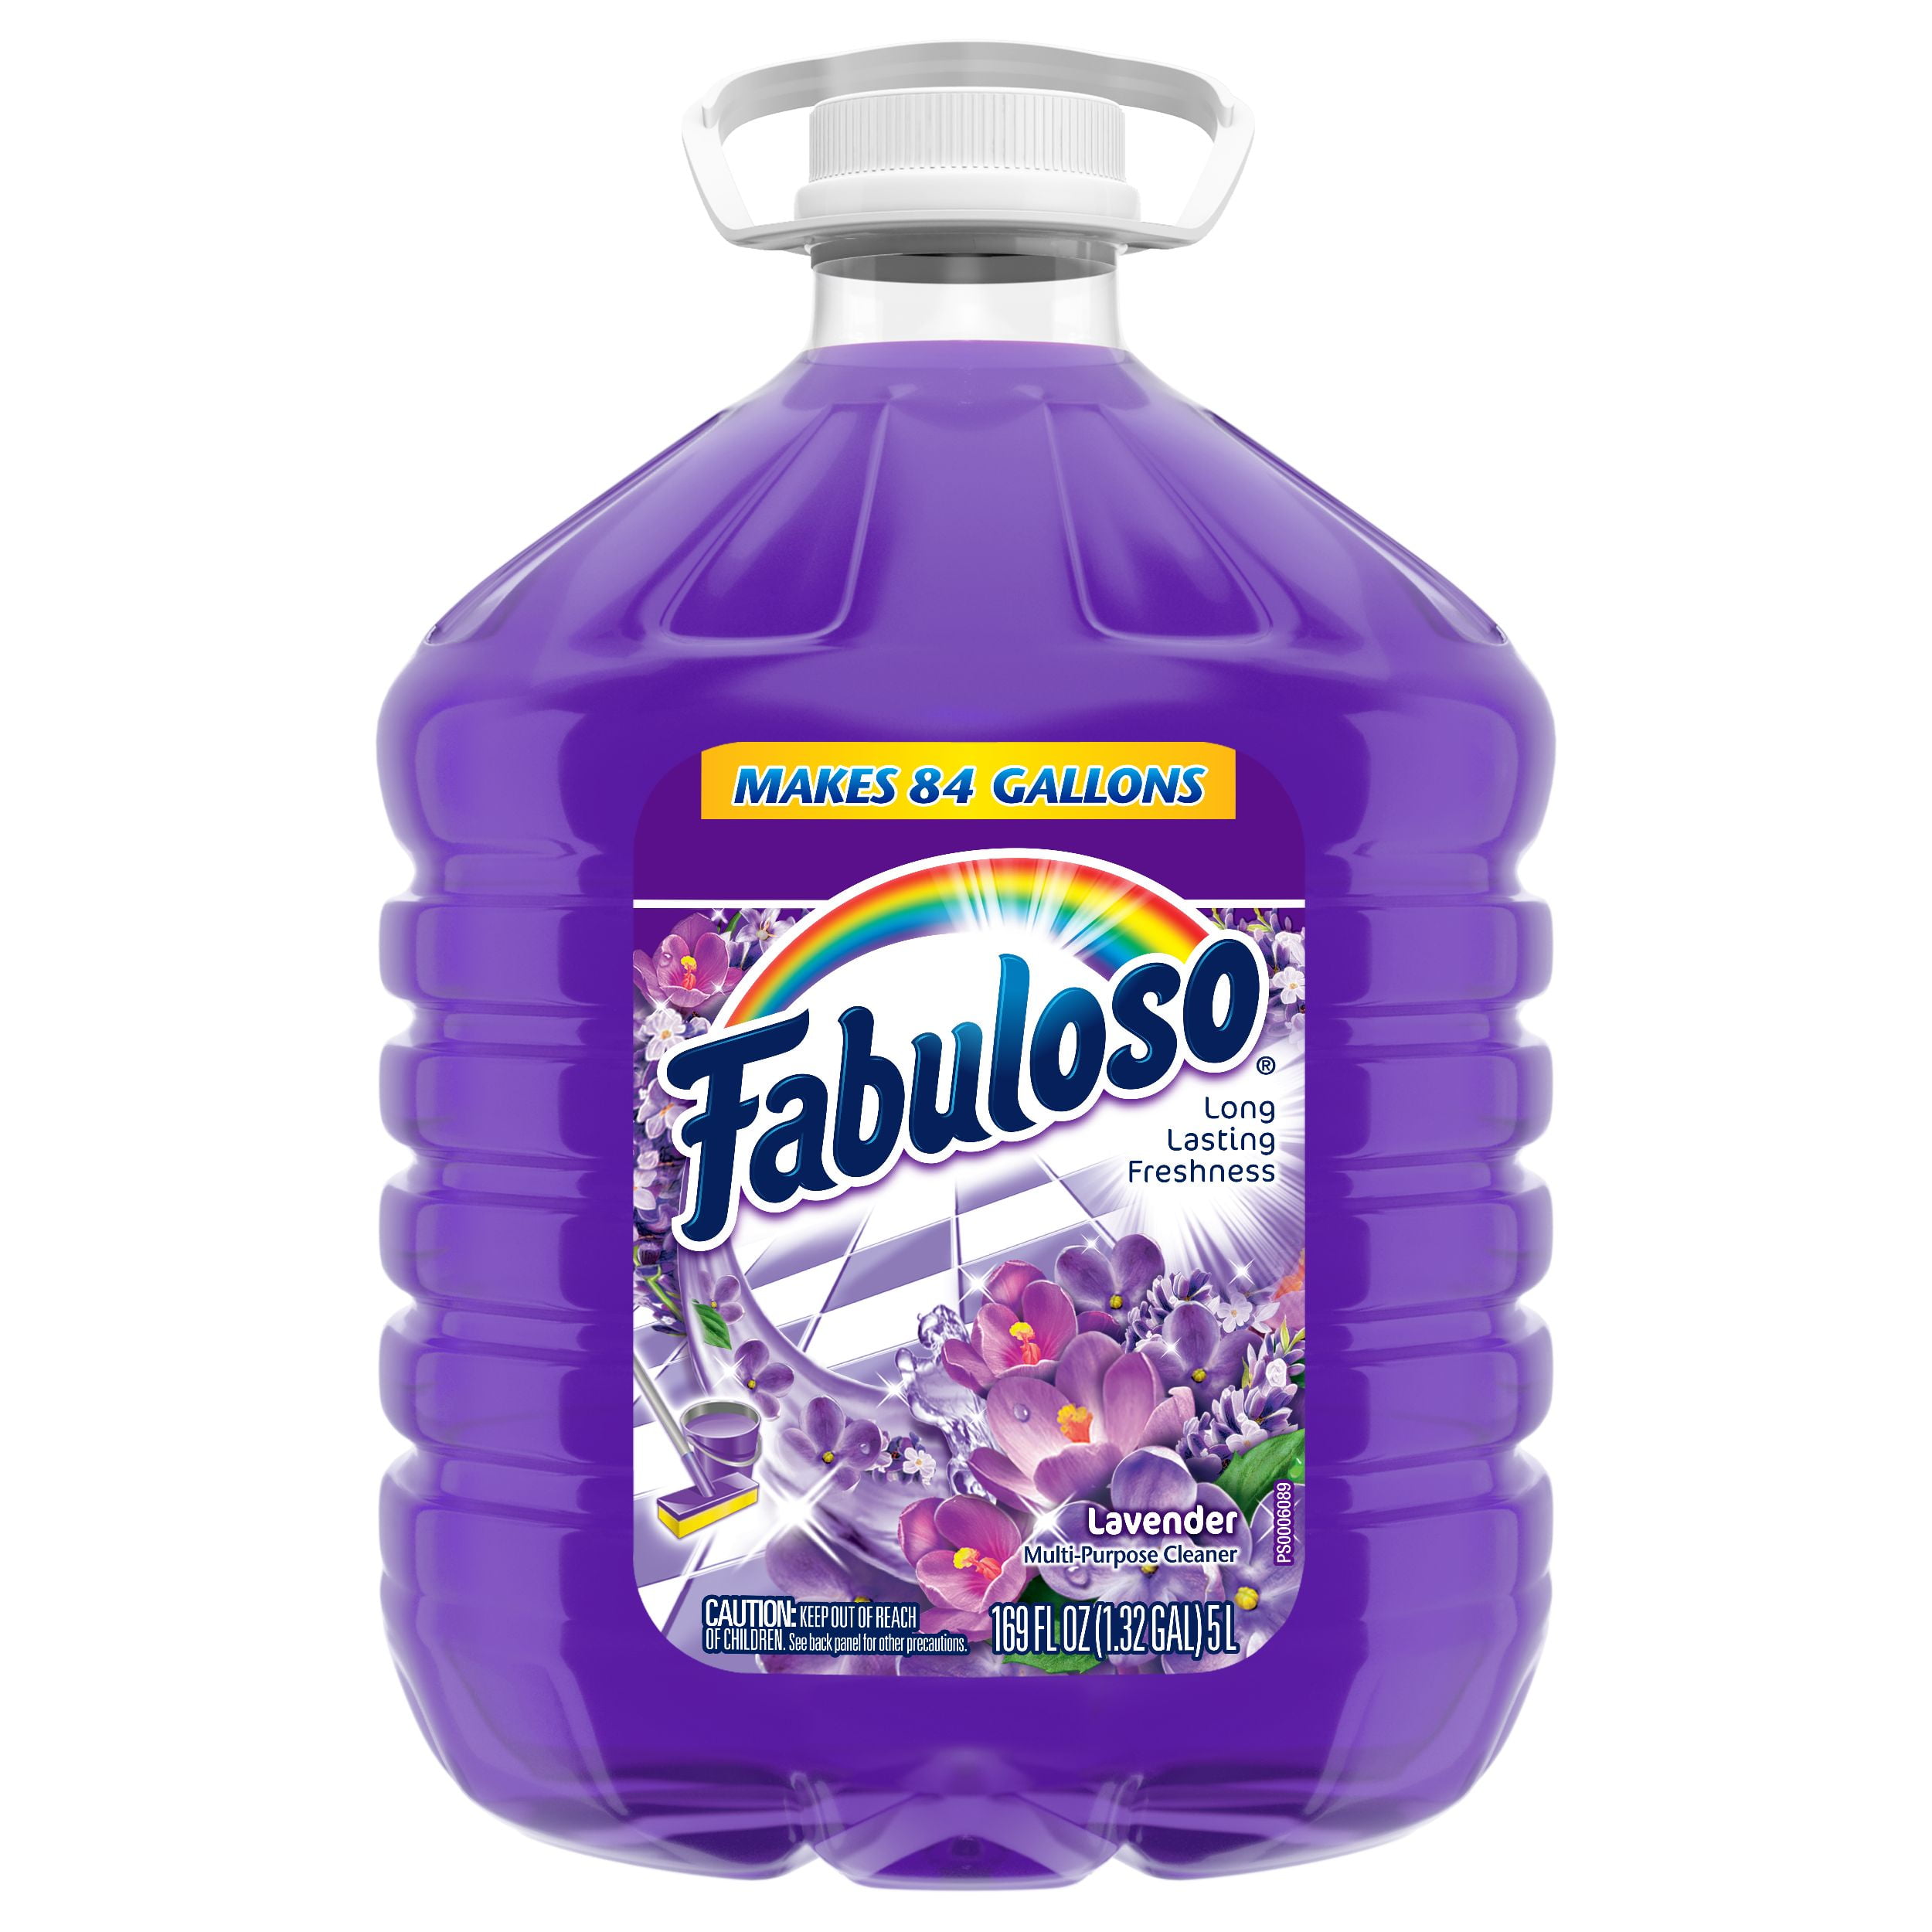 Fabuloso All Purpose Cleaner Lavender, Can I Use Fabuloso To Clean Hardwood Floors